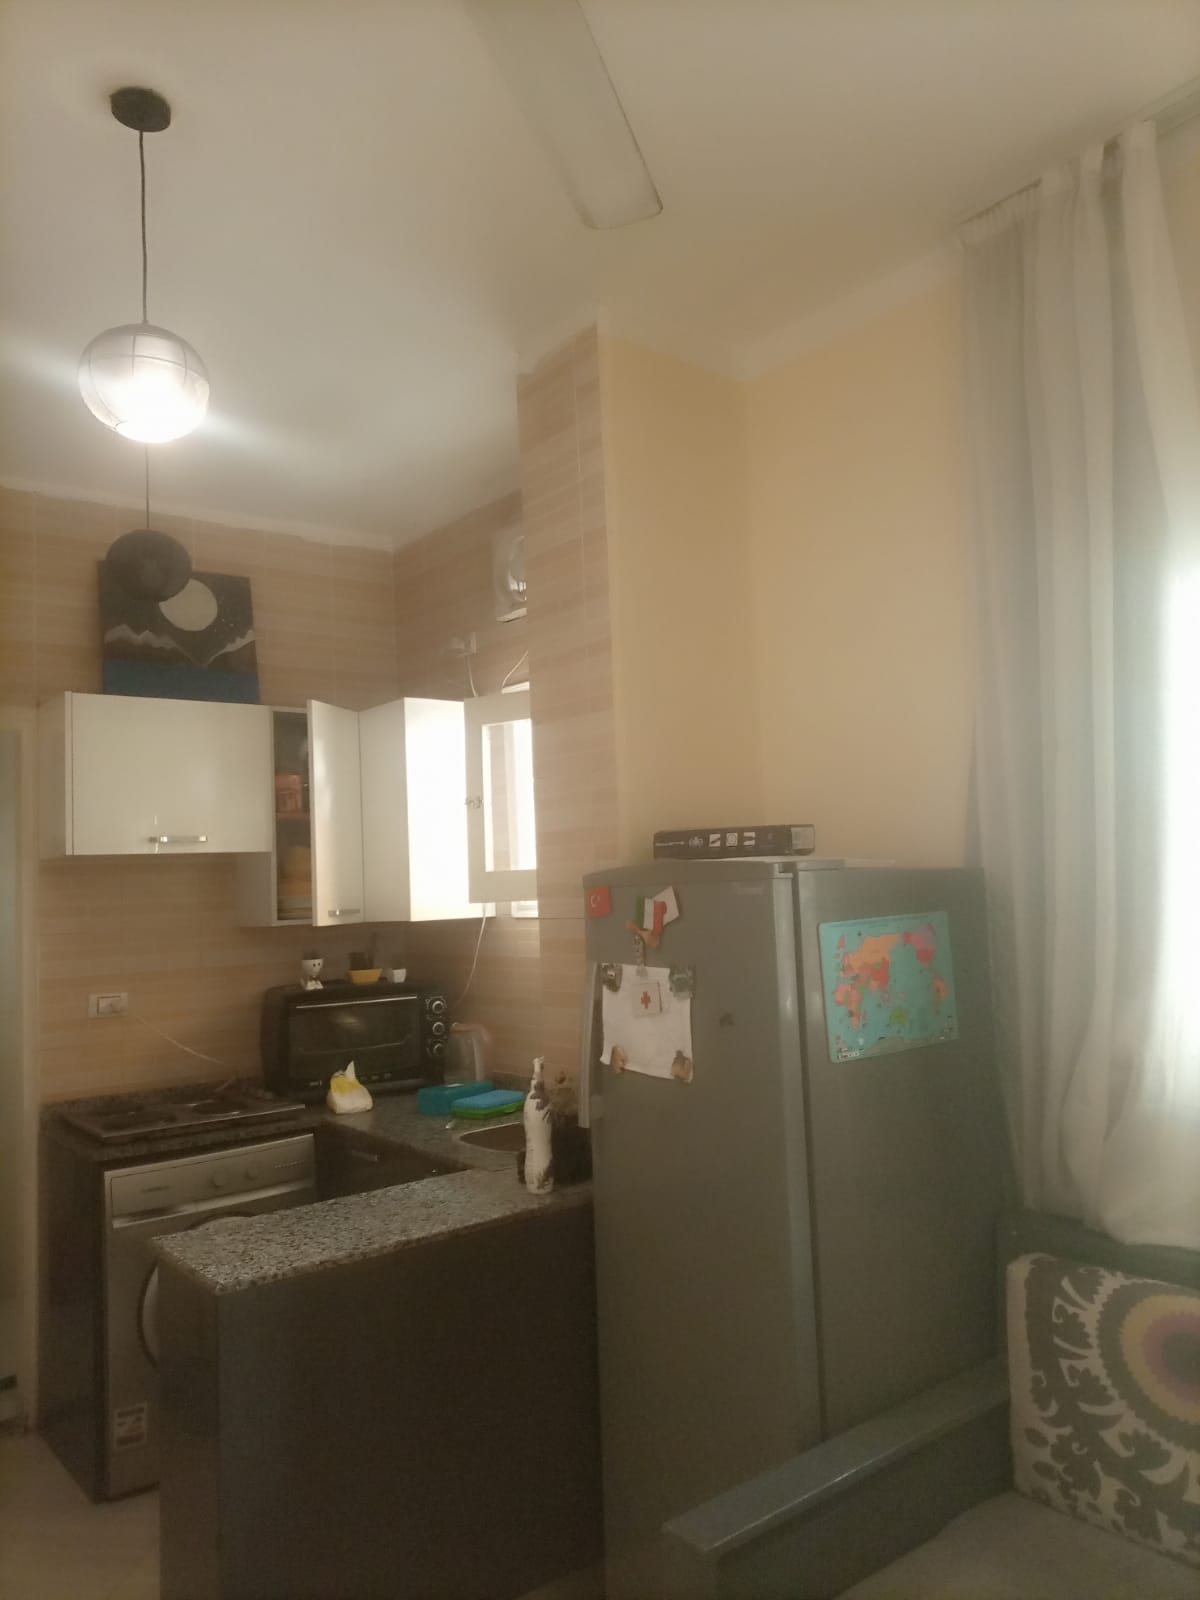 1273 1 bedroom apartment in the heart of hurghada